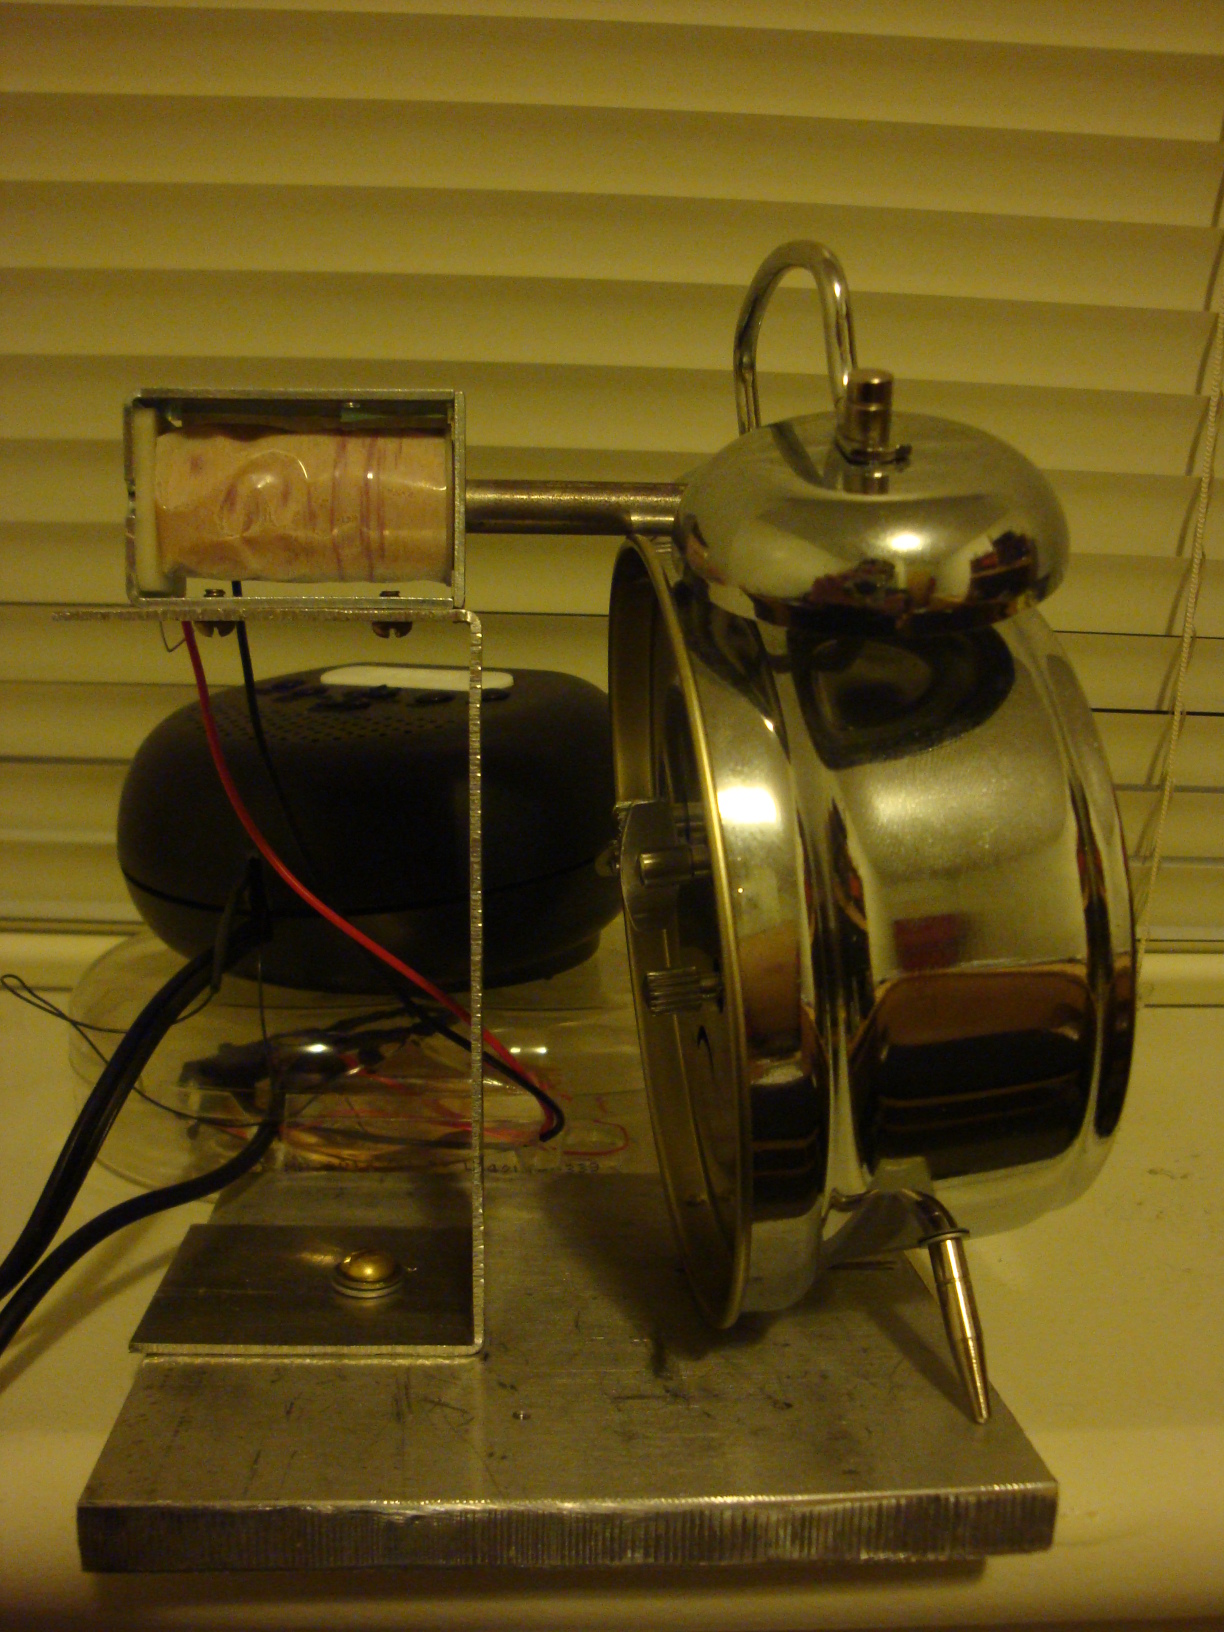 Side view of the setup with the mechanical alarm clock.